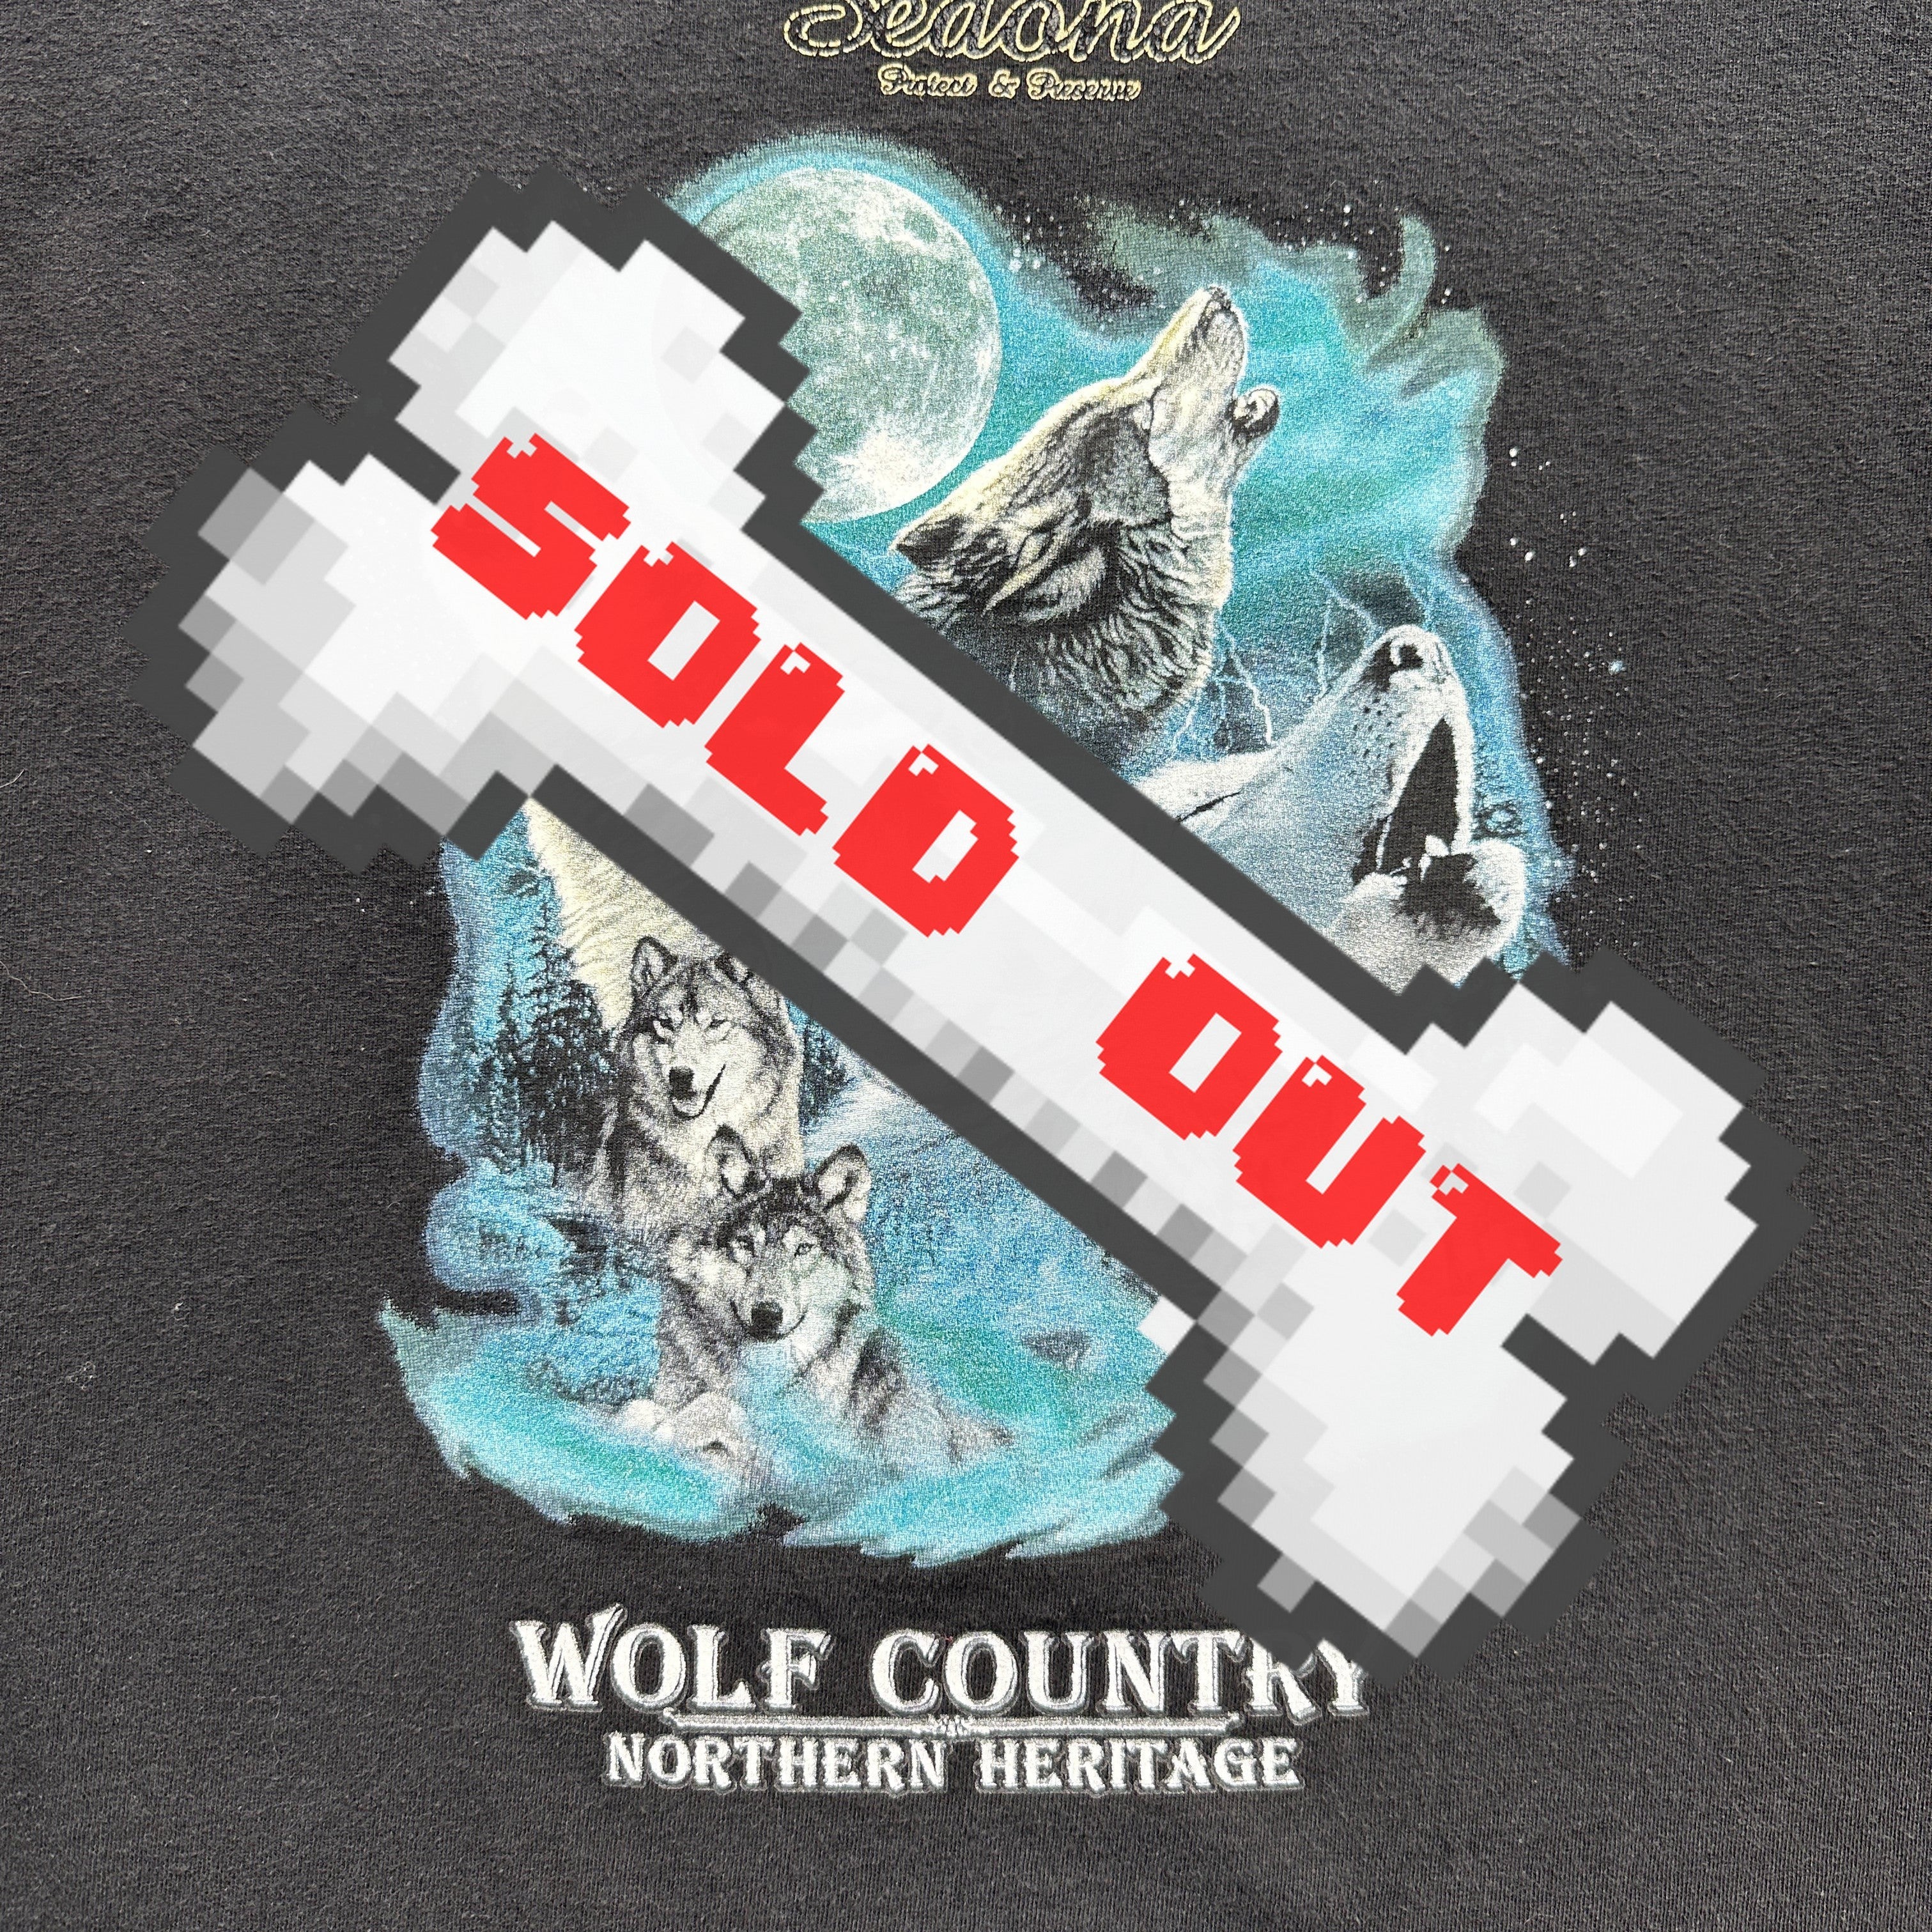 VINTAGE WOLF COUNTRY tee!